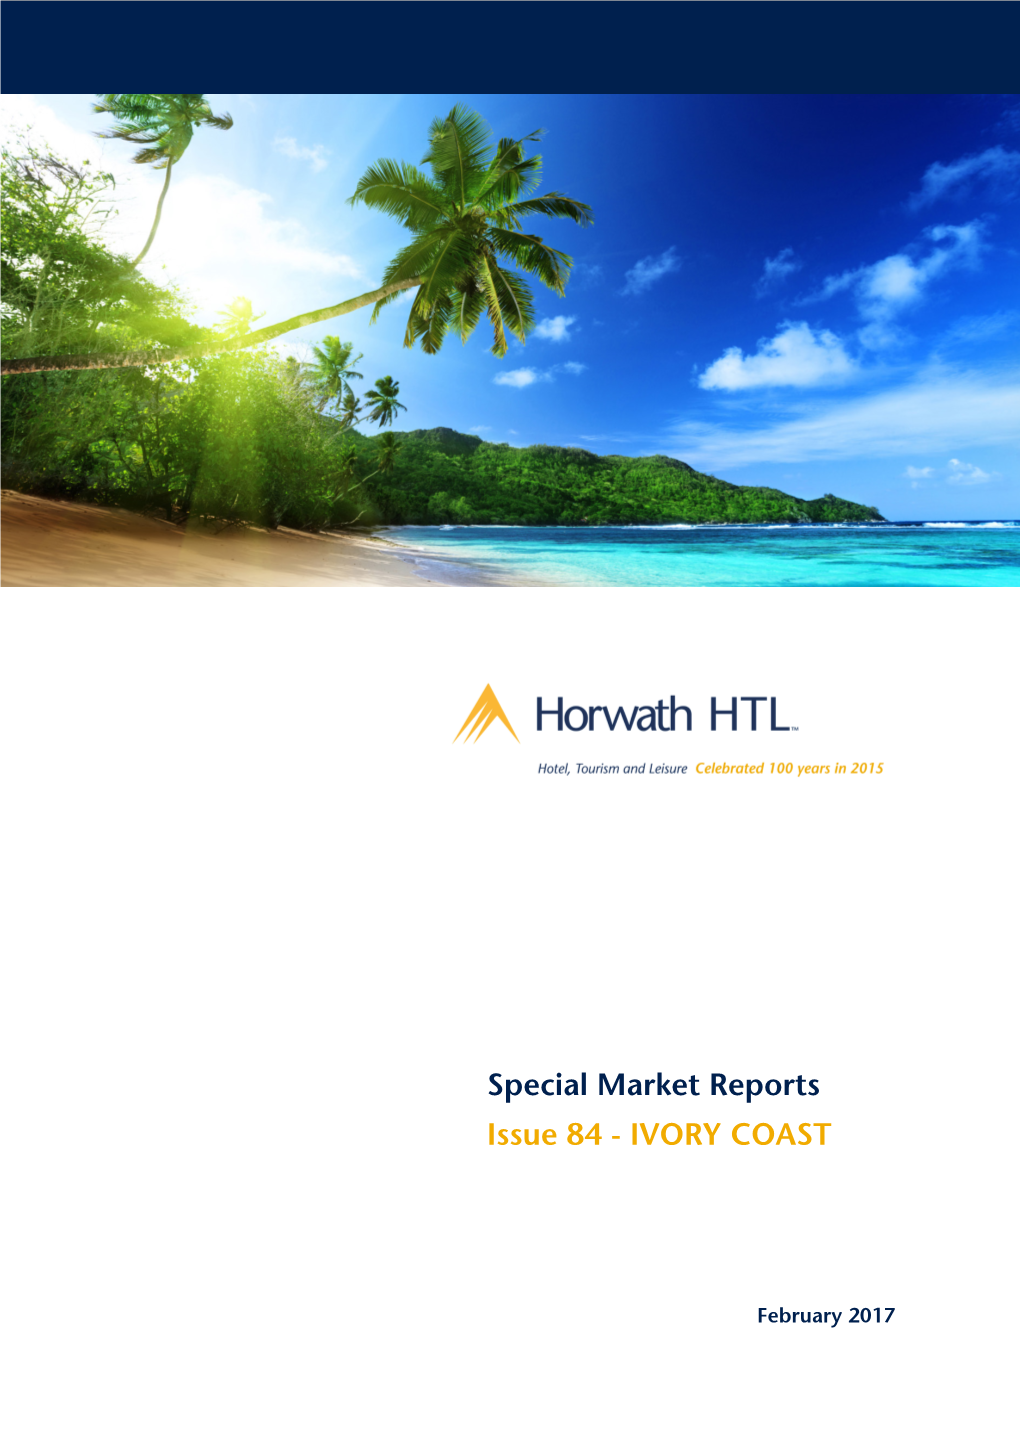 Special Market Reports Issue 84 - IVORY COAST